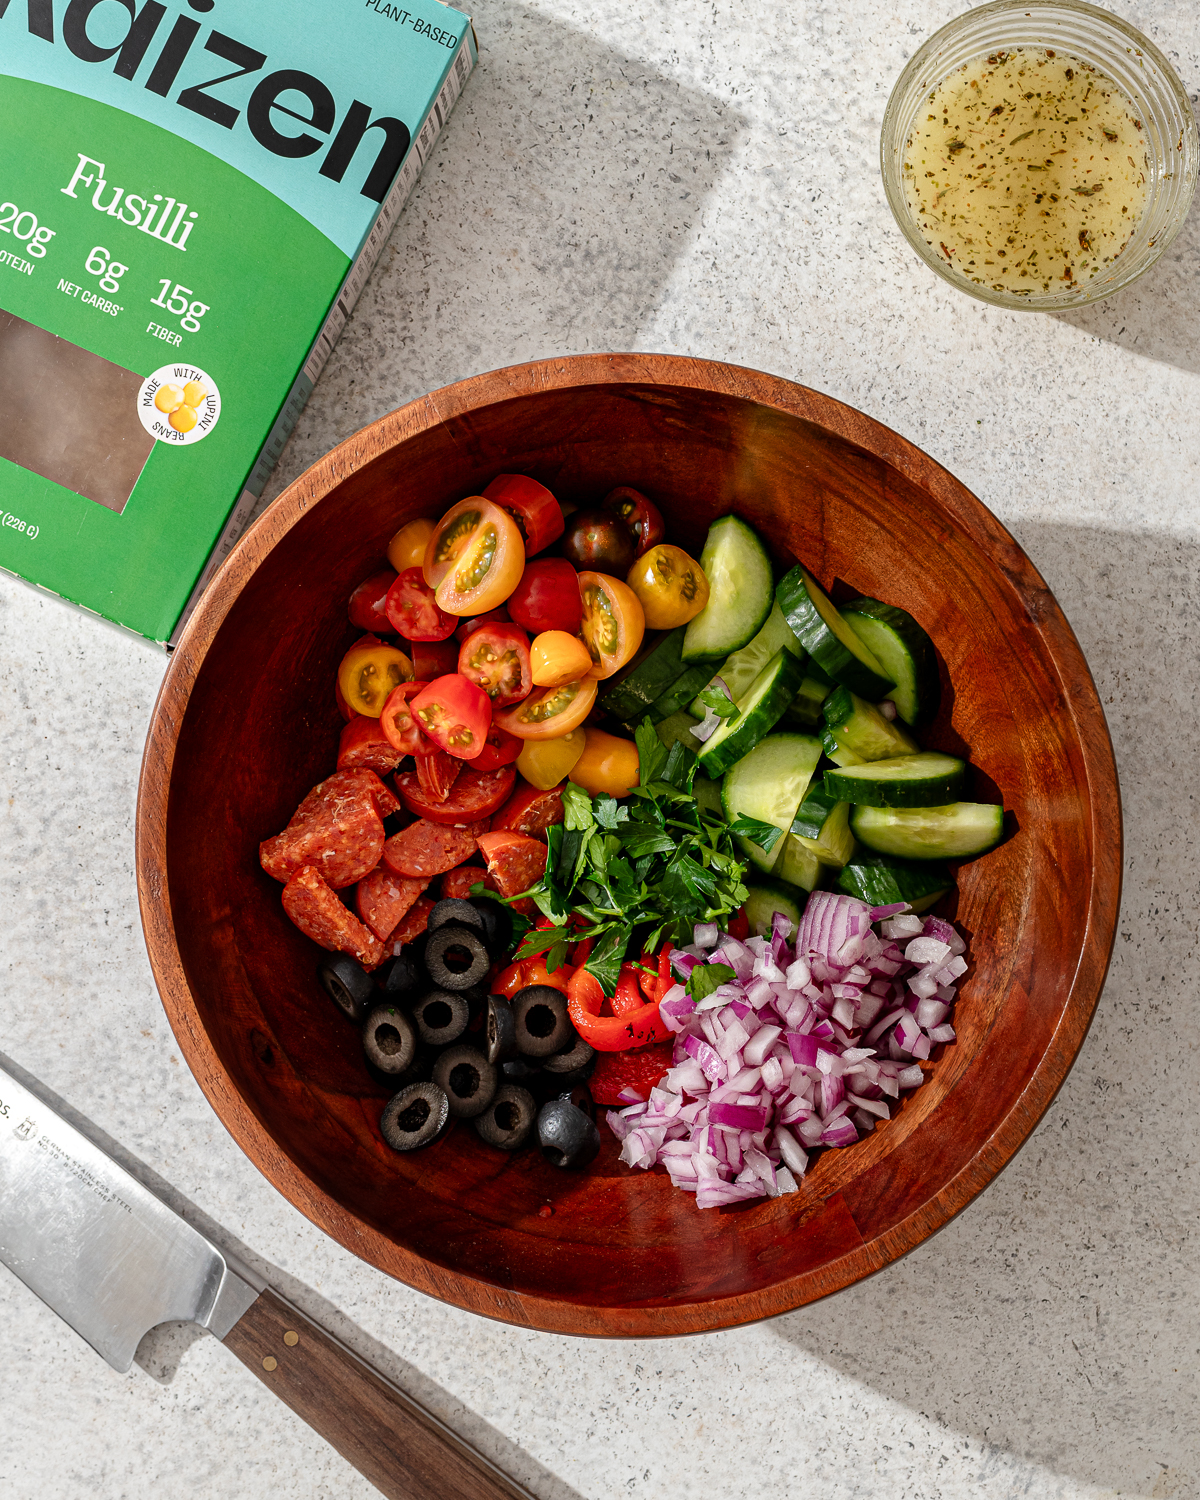 Ingredients for high protein pasta salad in a wooden bowl.